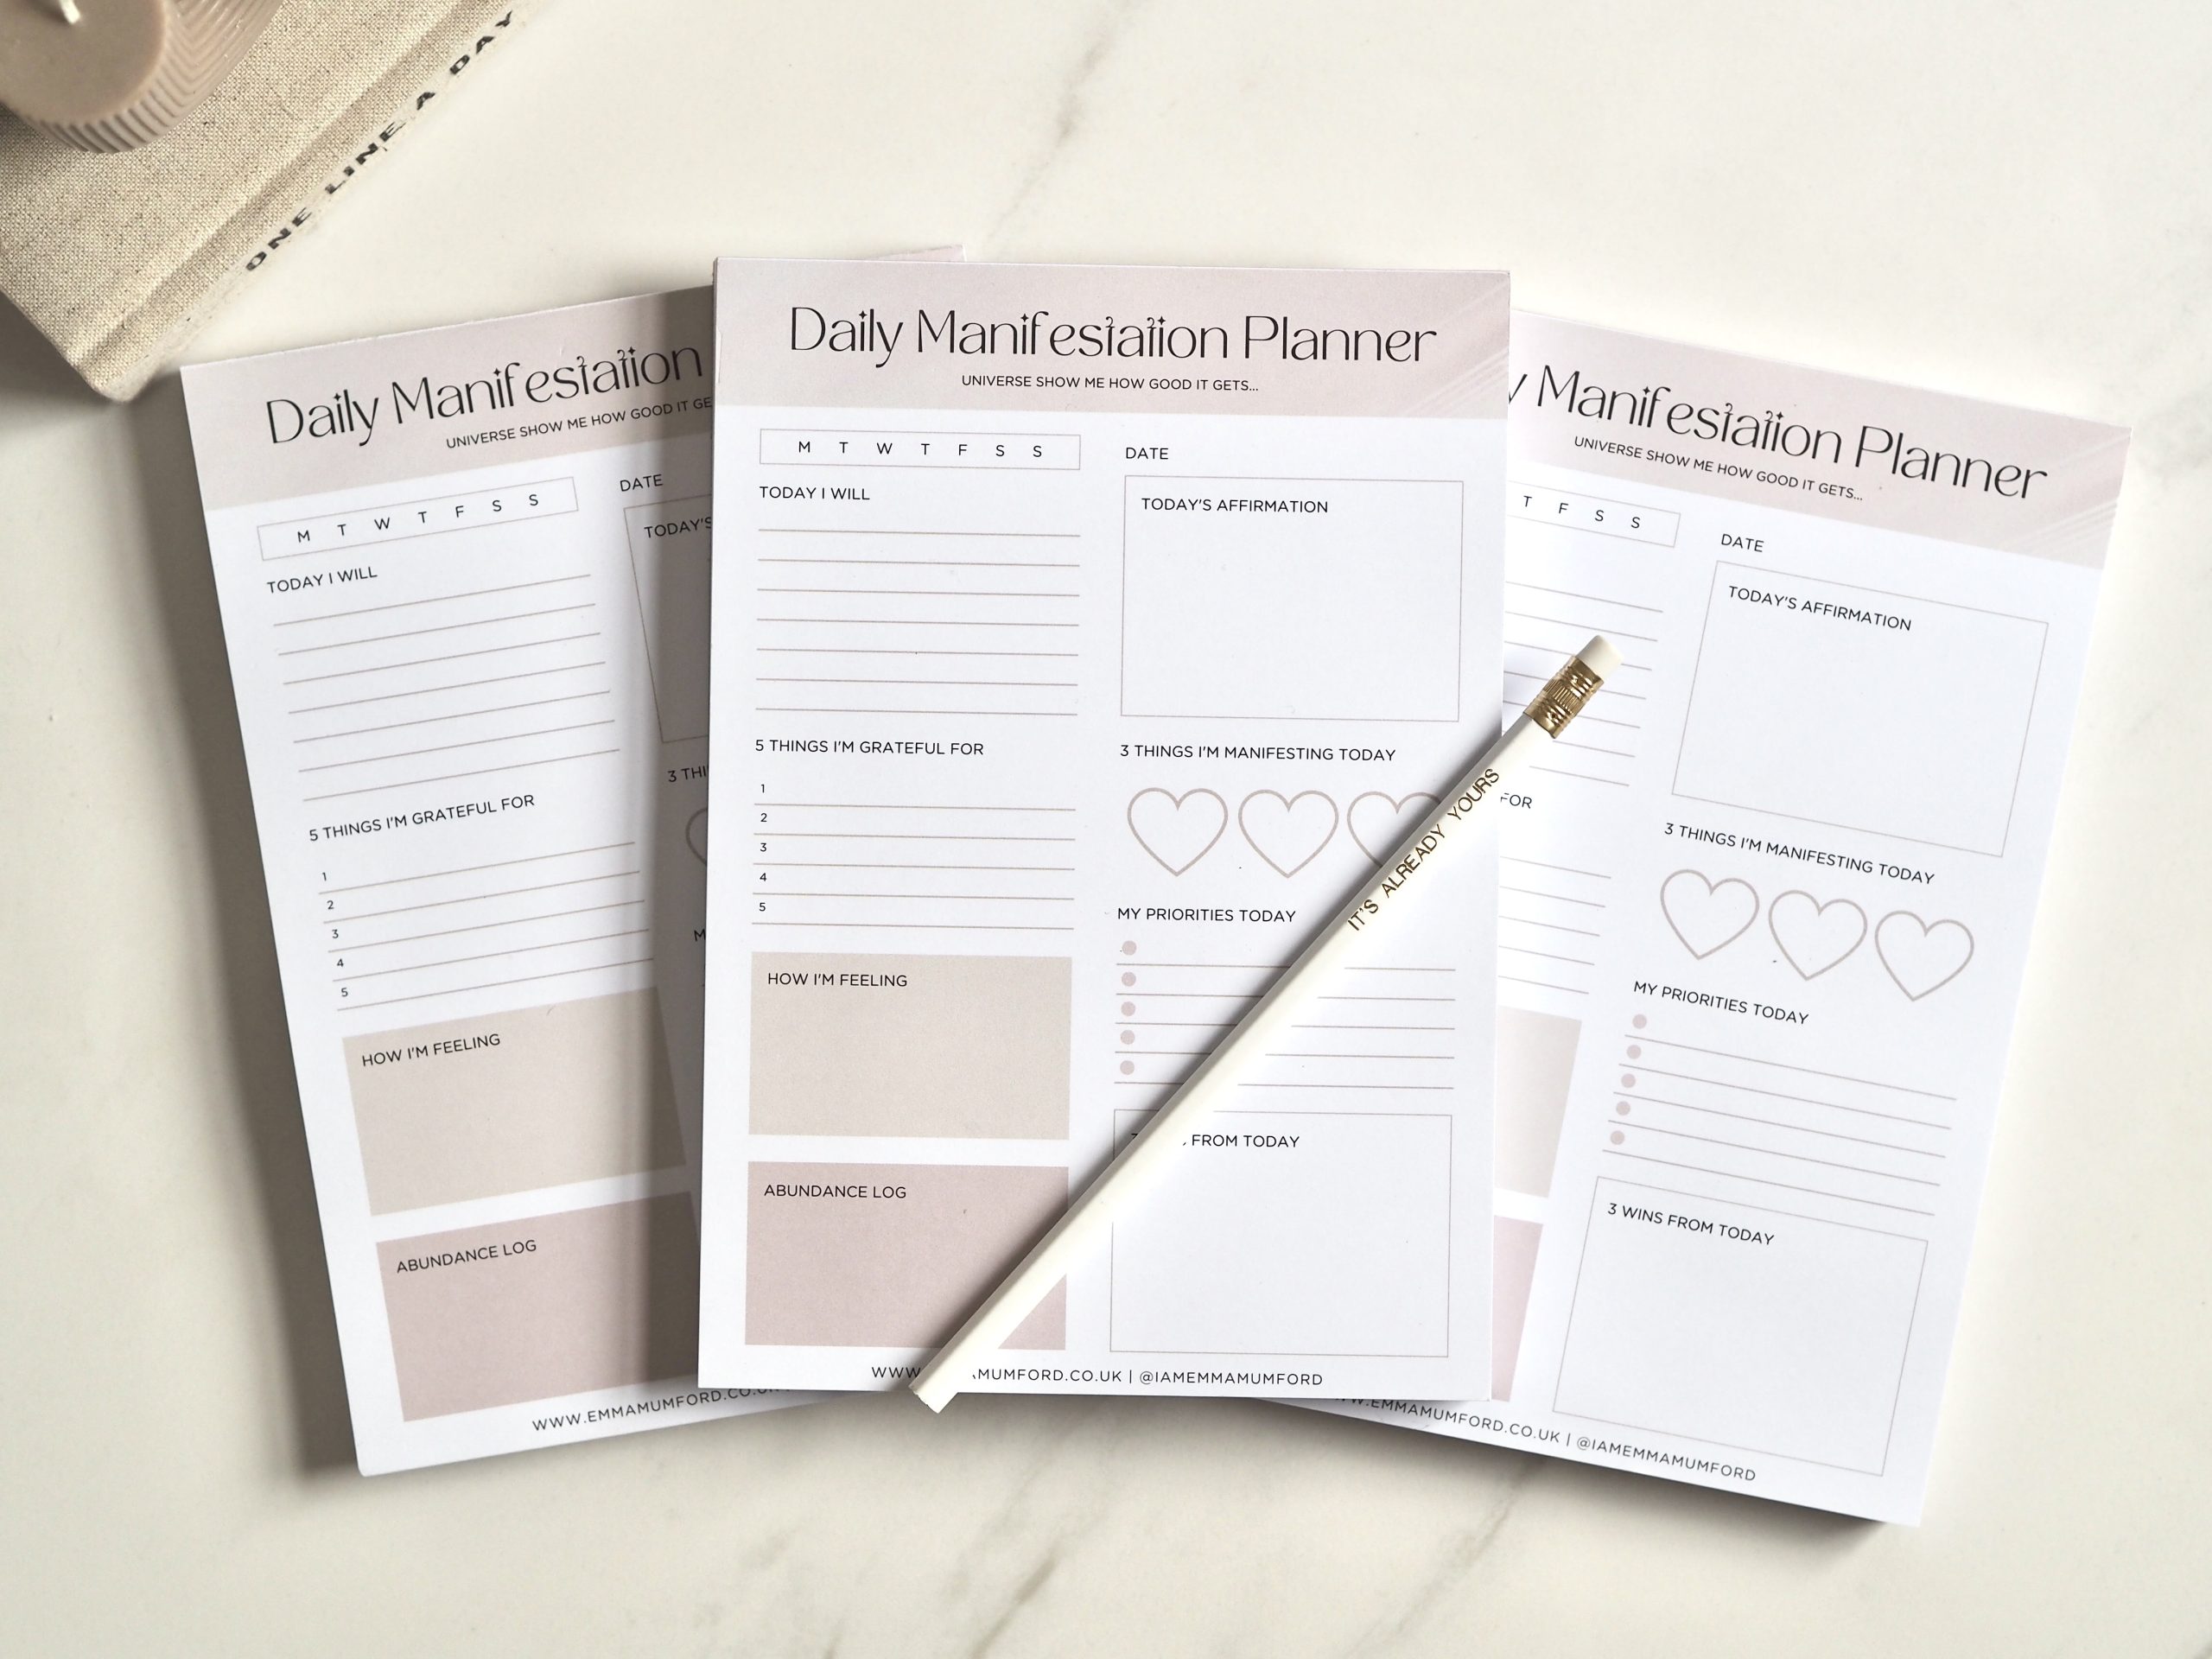 DAILY MANIFESTATION PLANNER A5 | LAW OF ATTRACTION STORE